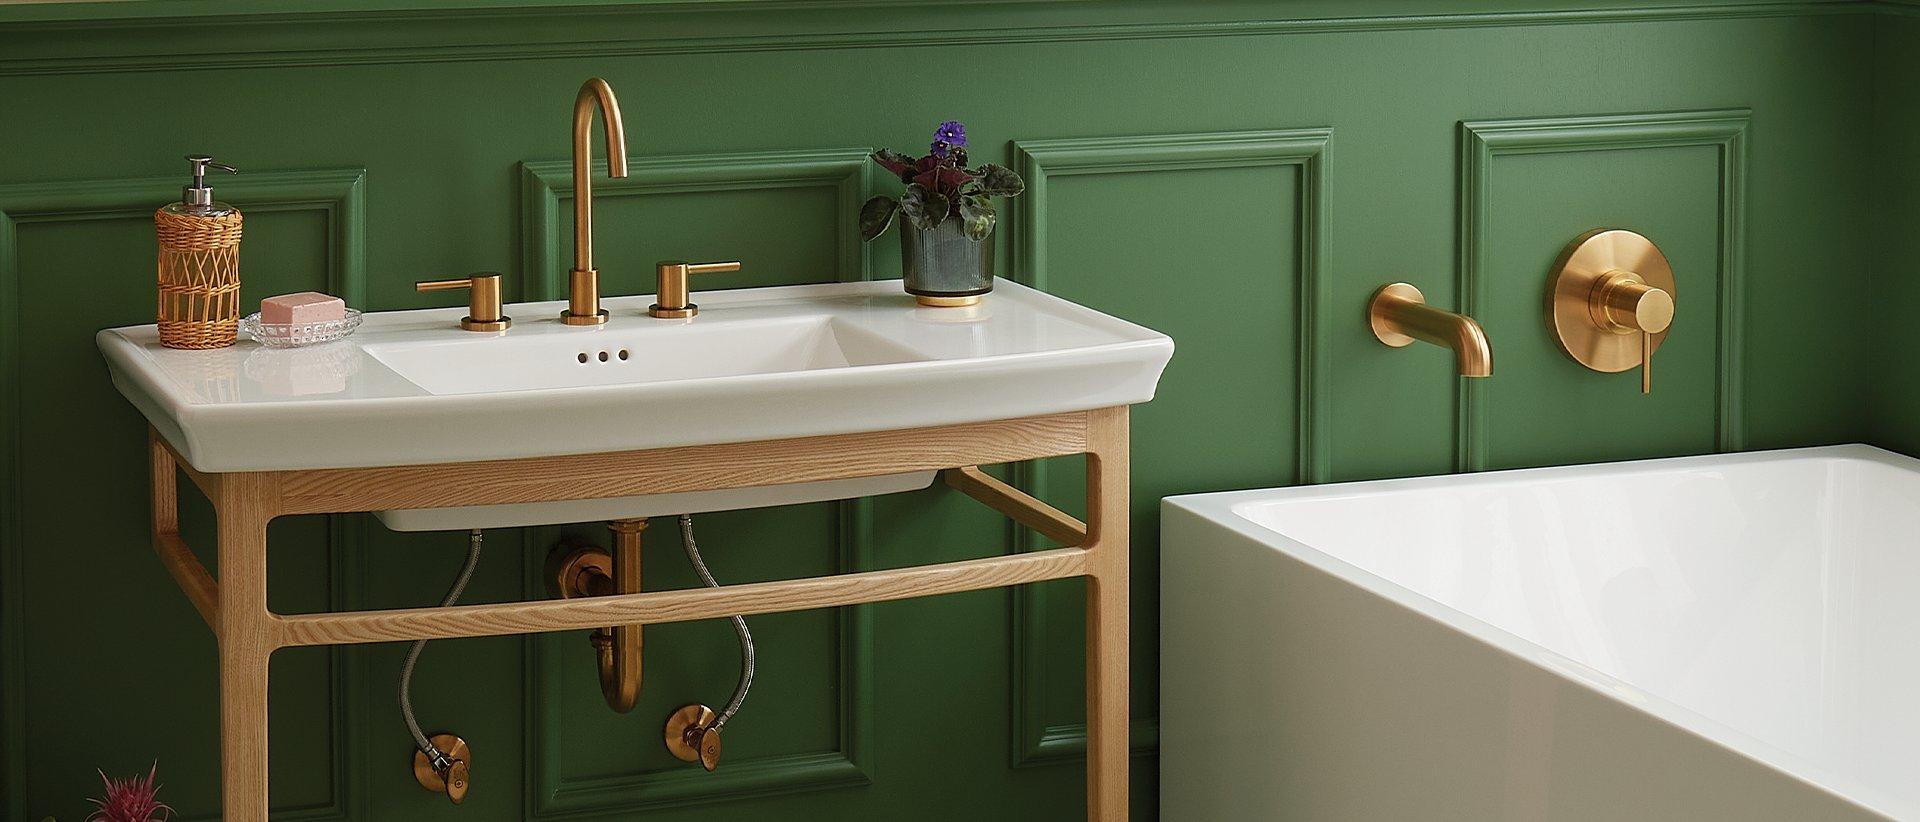 console sink with gold widespread faucet